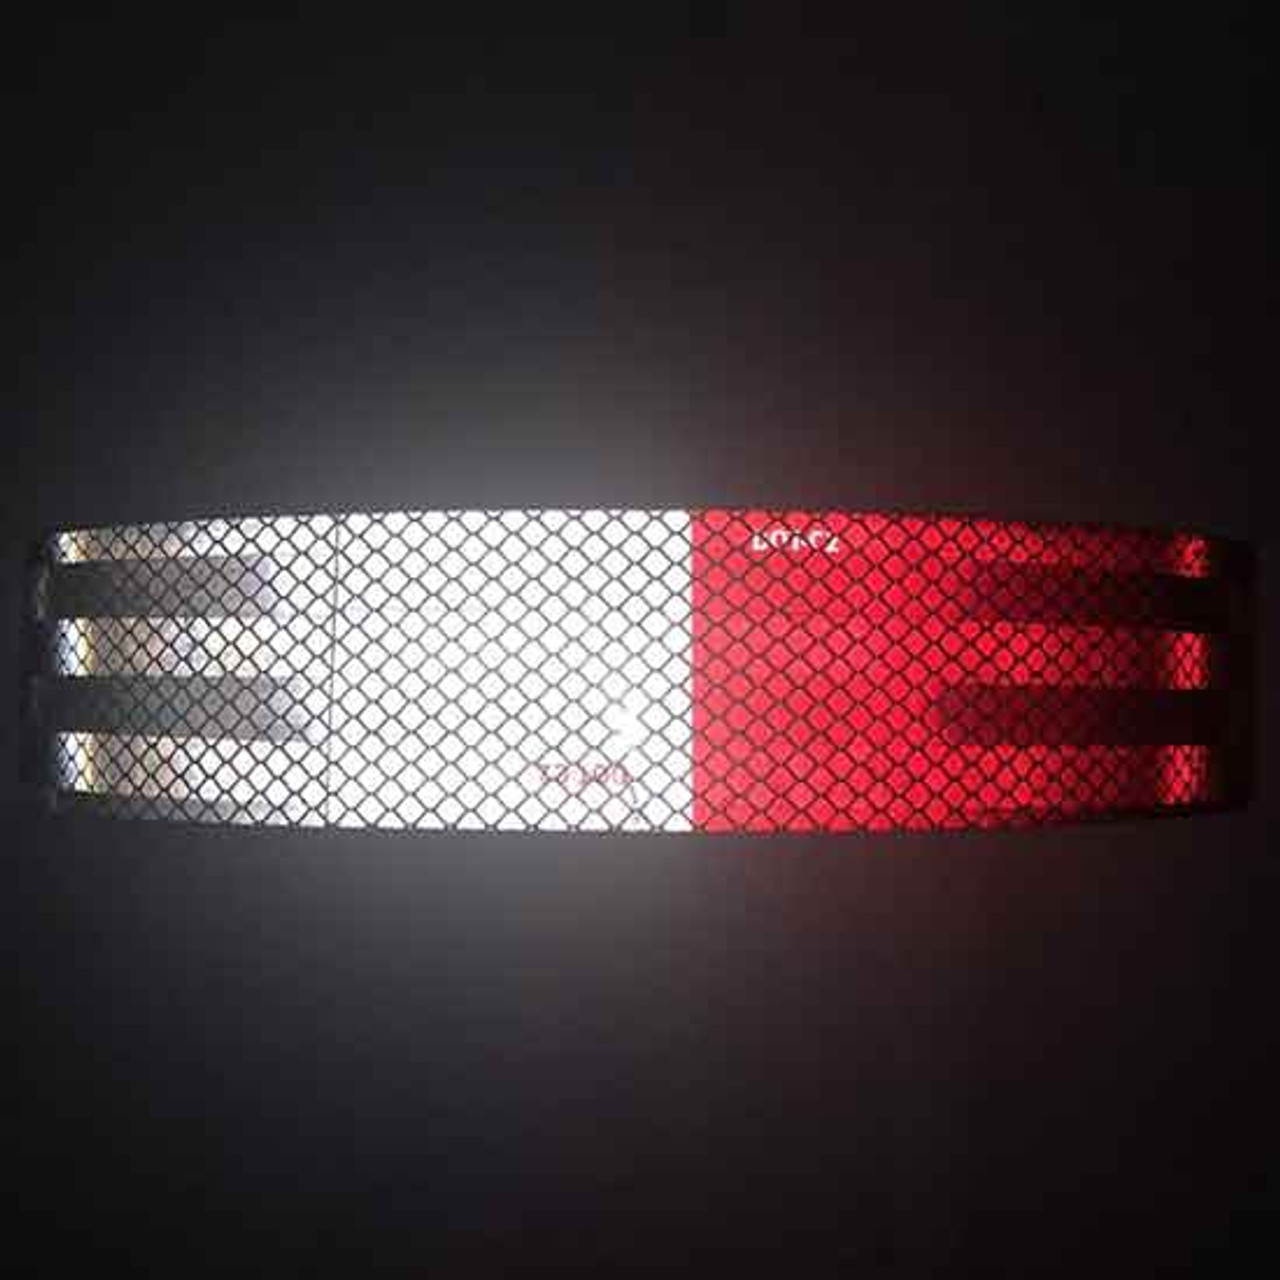 Conspicuity / Retro Reflective Tape for 2-Wheelers - Where to buy? -  Team-BHP